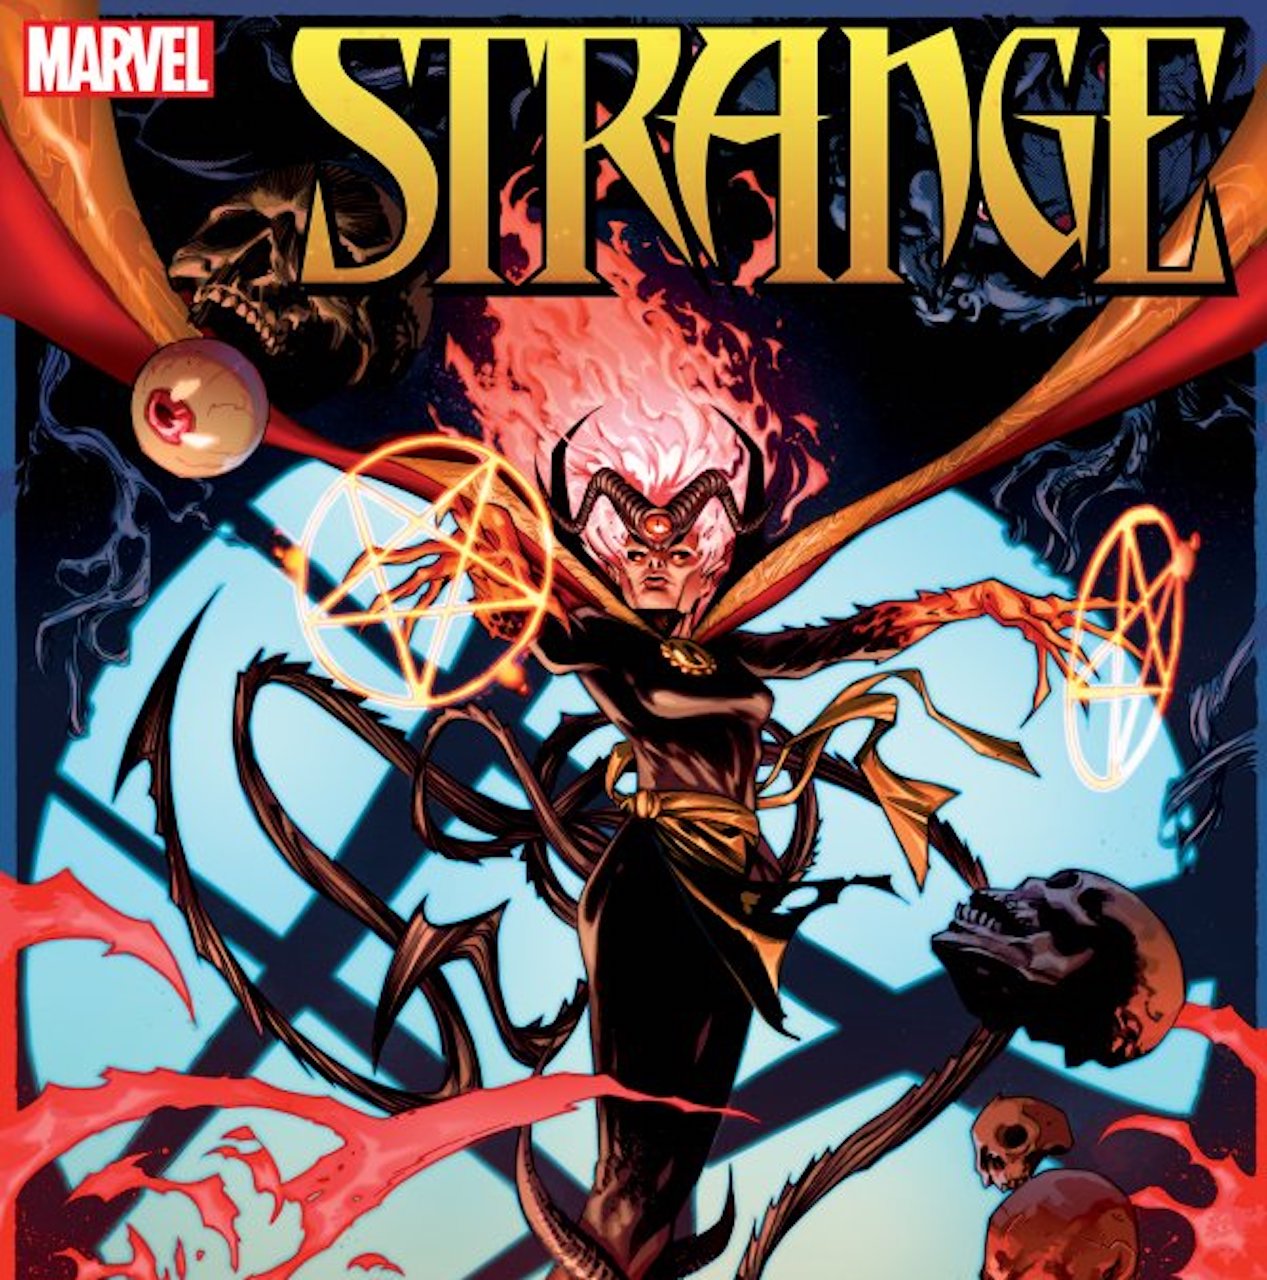 A new cosmic form melding life, death, and romance is introduced in 'Strange' #5